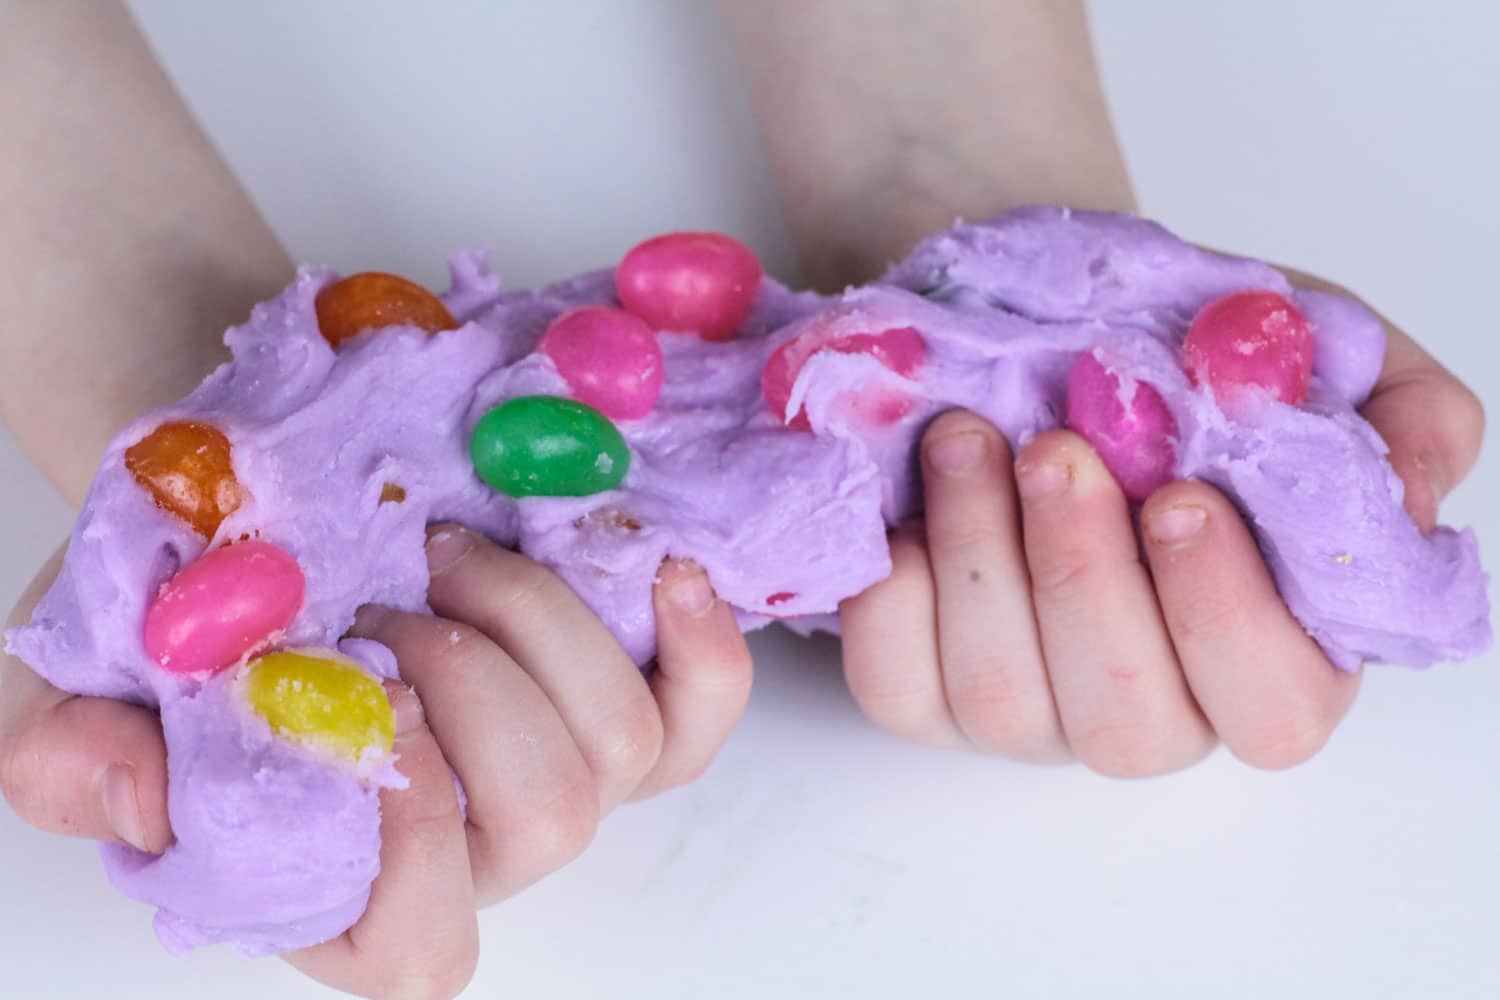 Do you love slime? Want to know how to make edible slime? This edible jellybean slime recipe is the perfect edible slime recipe for Easter! You don't have to be a slime expert to make this tasty borax-free slime for Easter! The perfect Easter slime recipe!